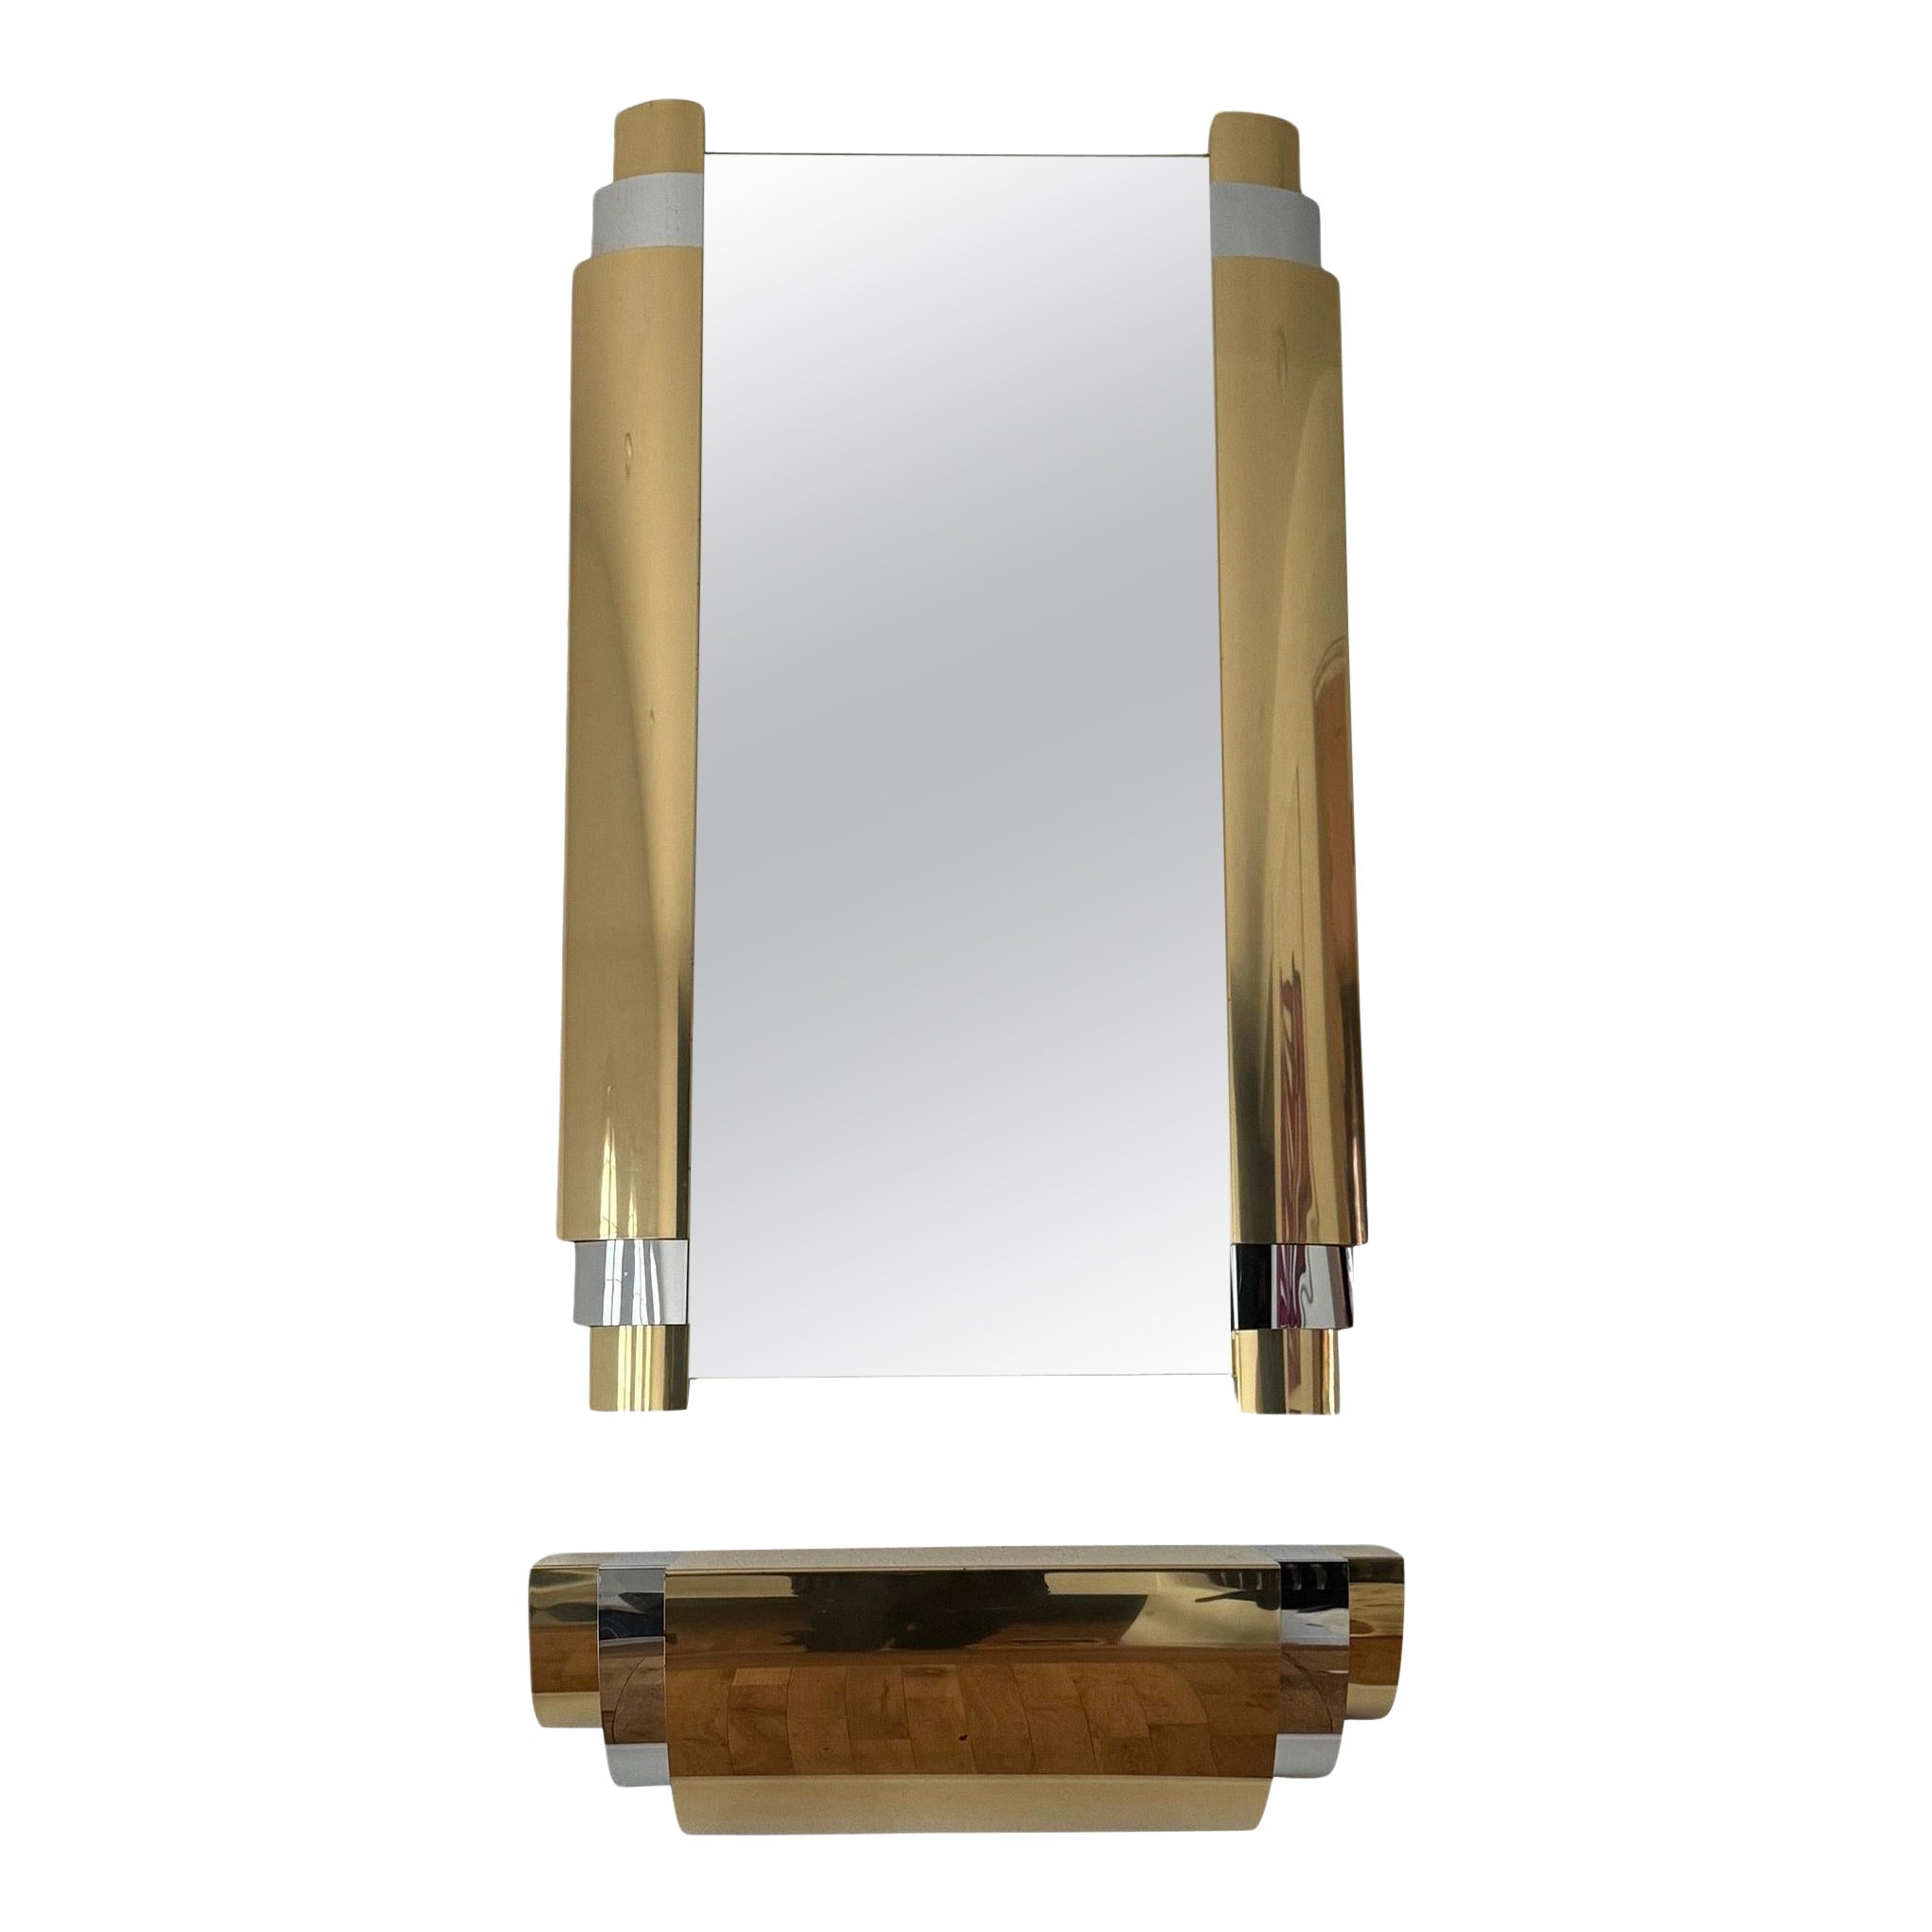 1980s Curtis Jere Brass and Chrome Wall Mounted Mirror With Floating Shelf For Sale